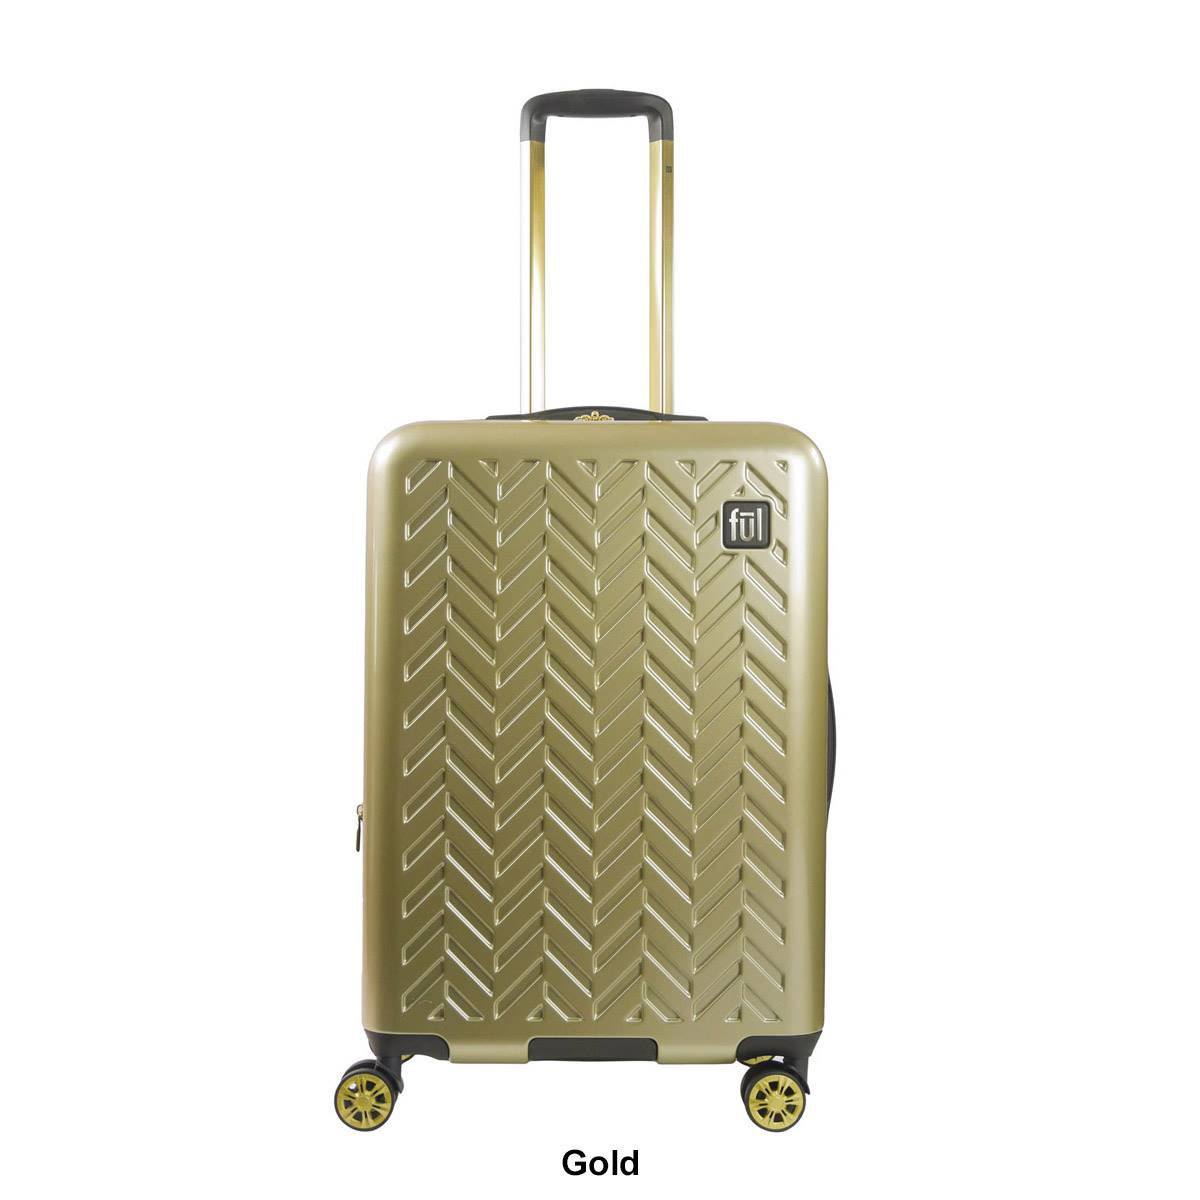 FUL 27in. Groove Hardside Spinner Luggage